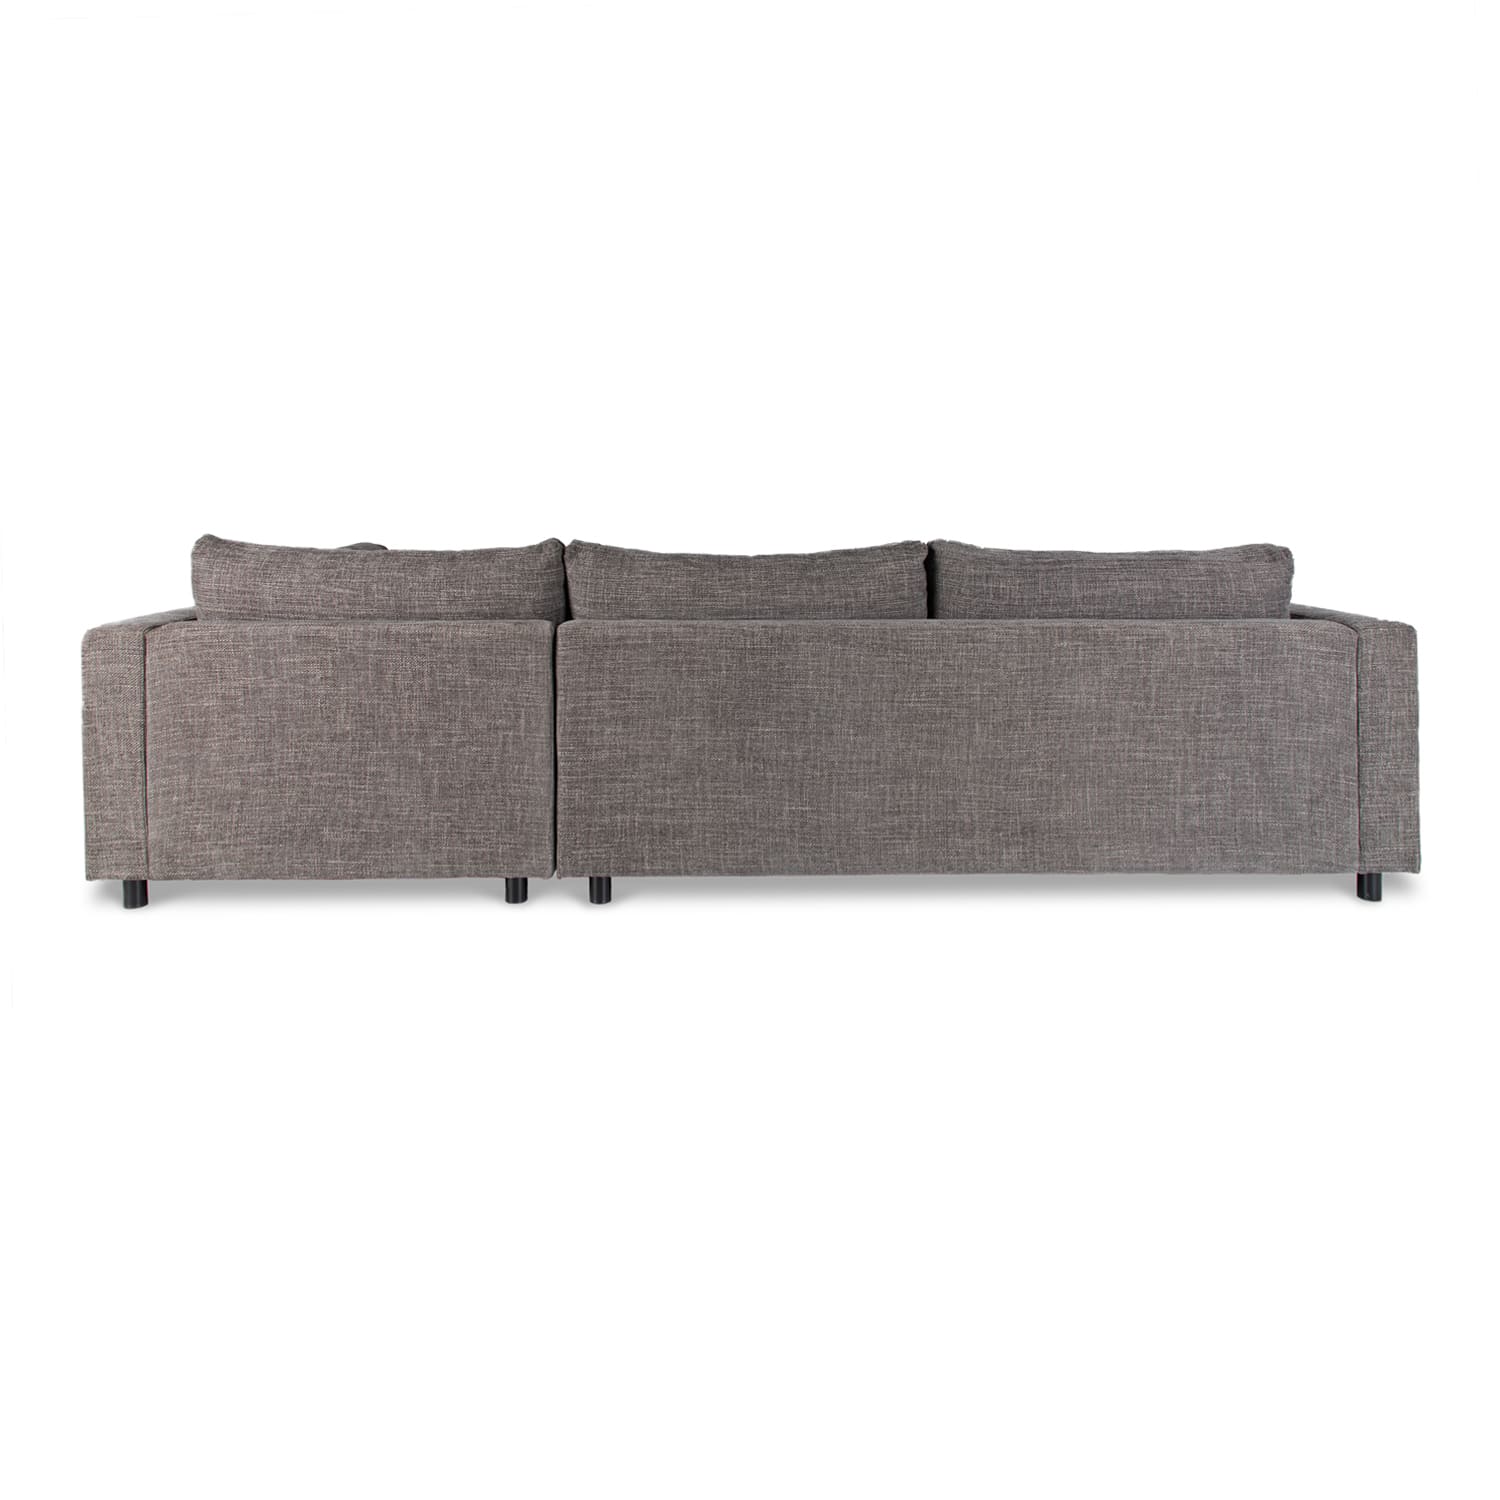 Alex Fabric Right Side Facing Chaise Lounge